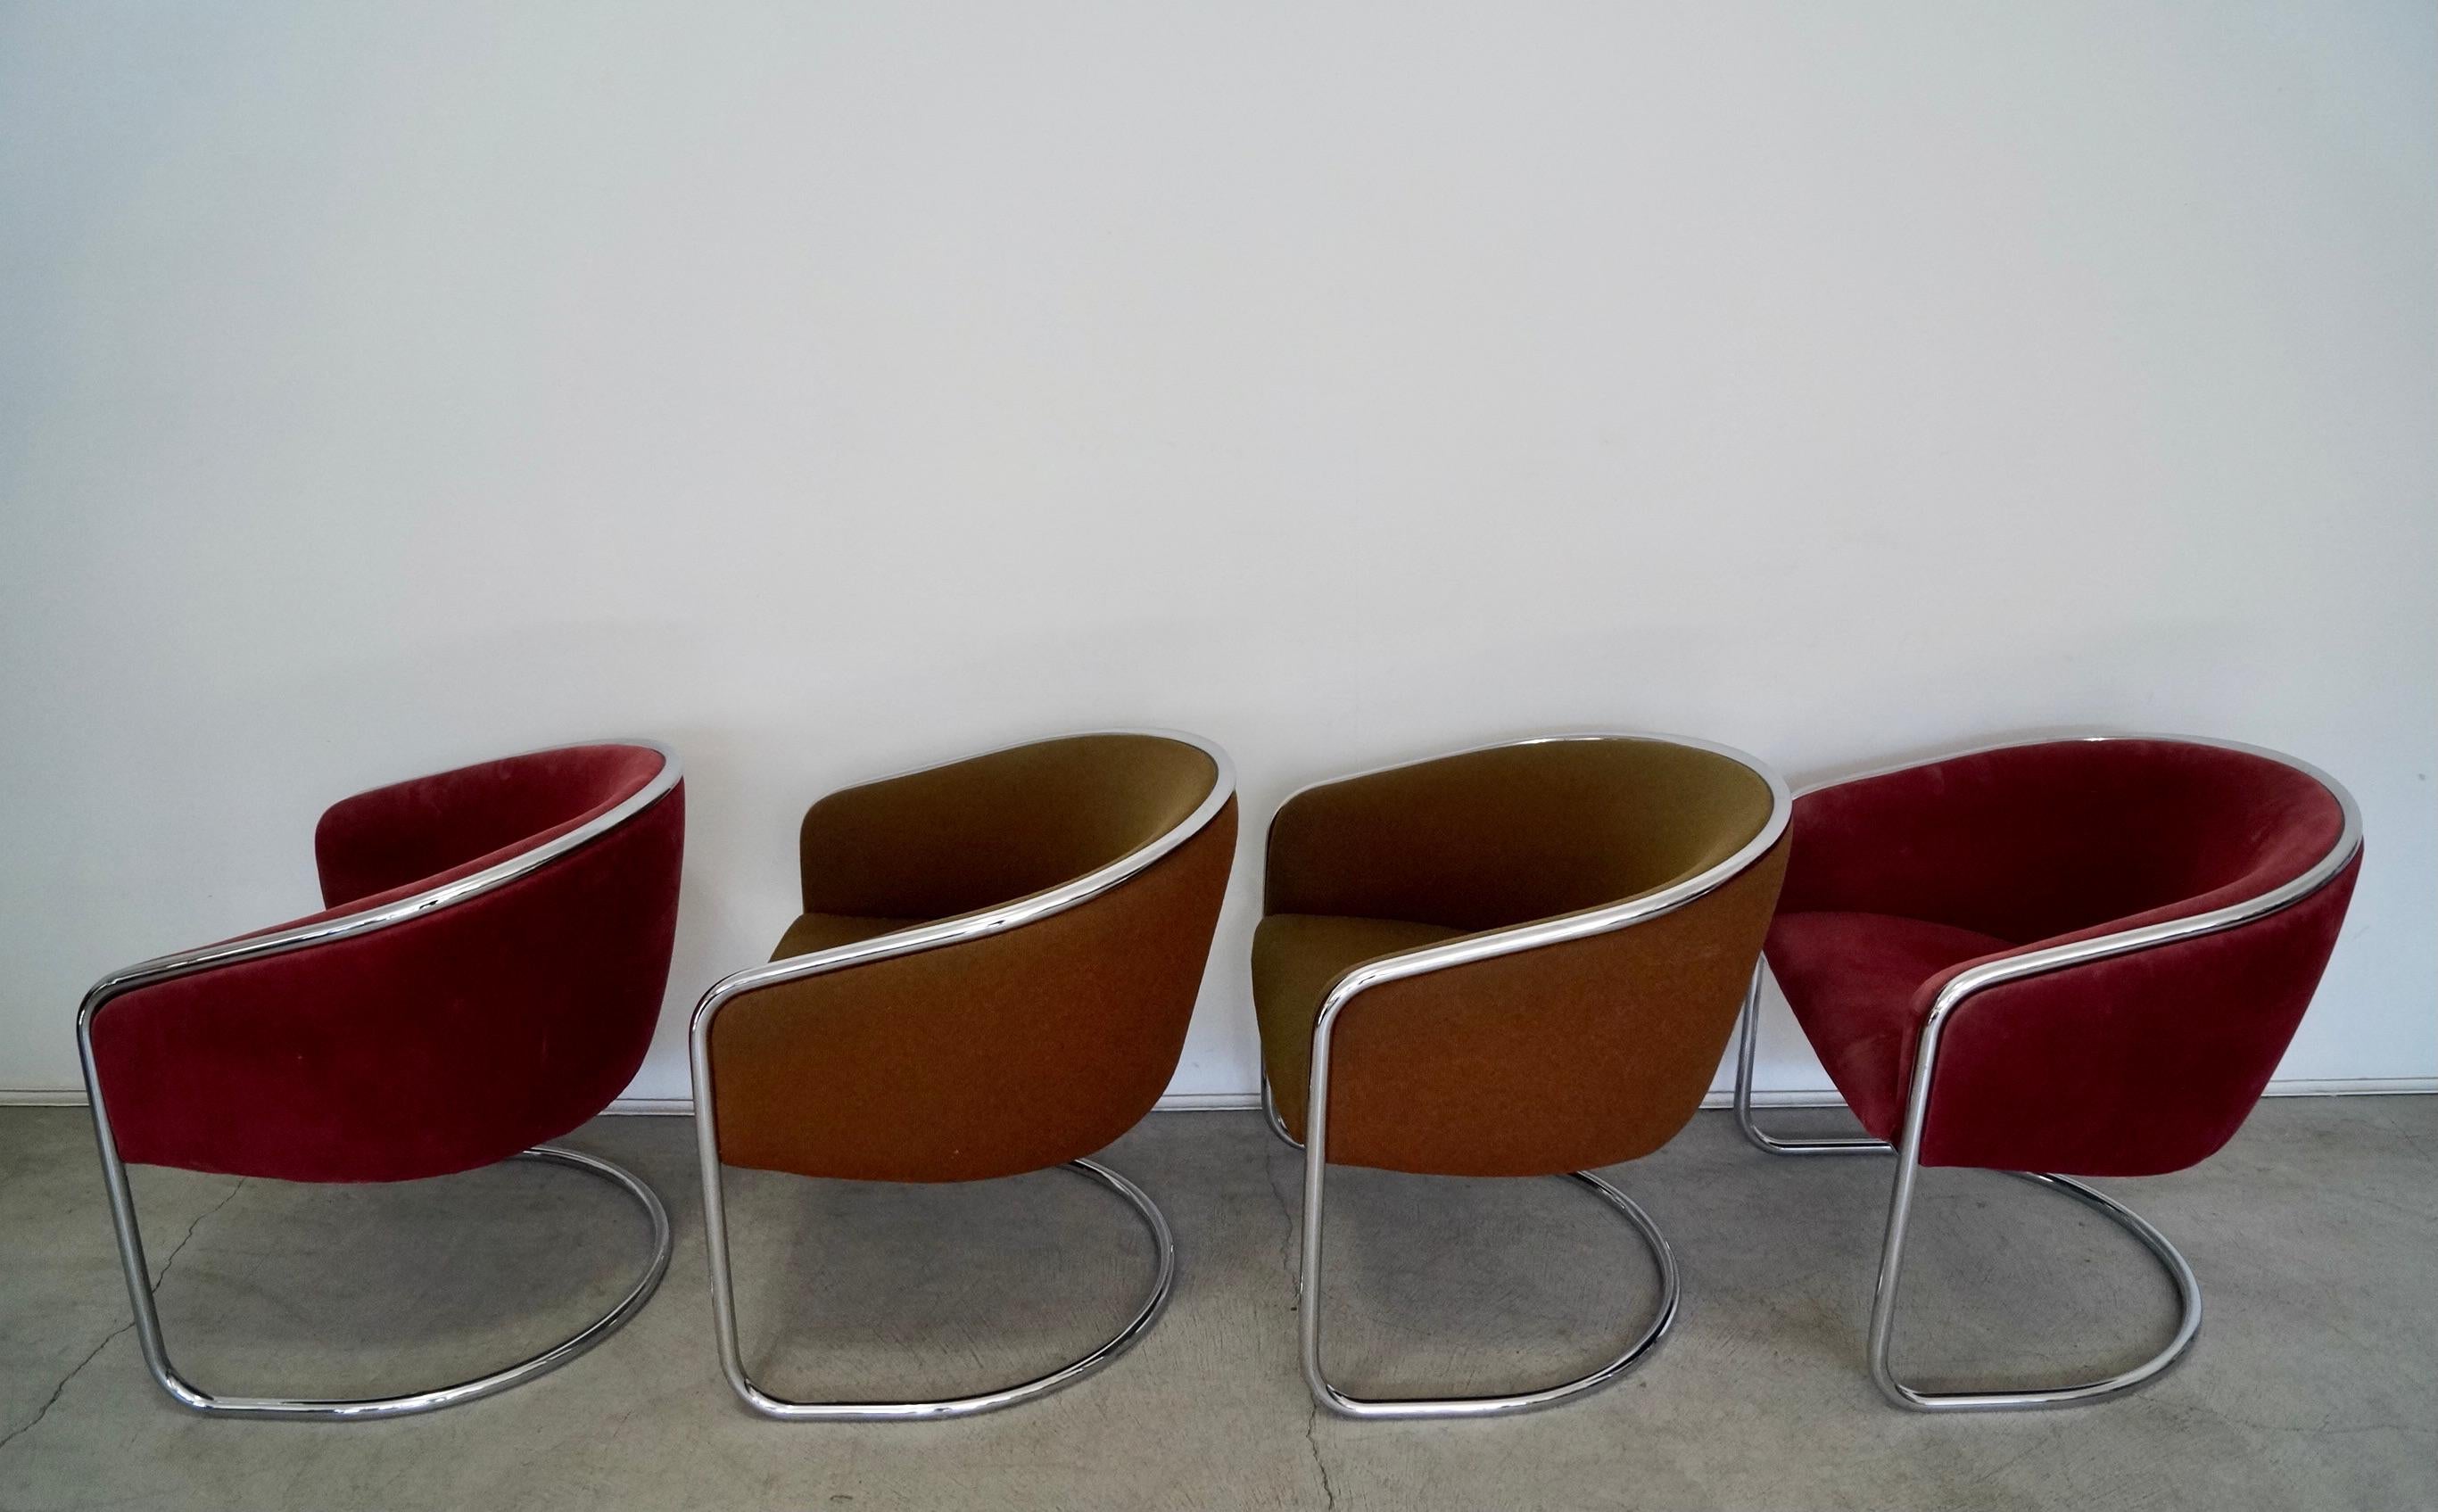 1970's Mid-Century Modern Thonet Chrome Armchairs - Set of Four For Sale 6